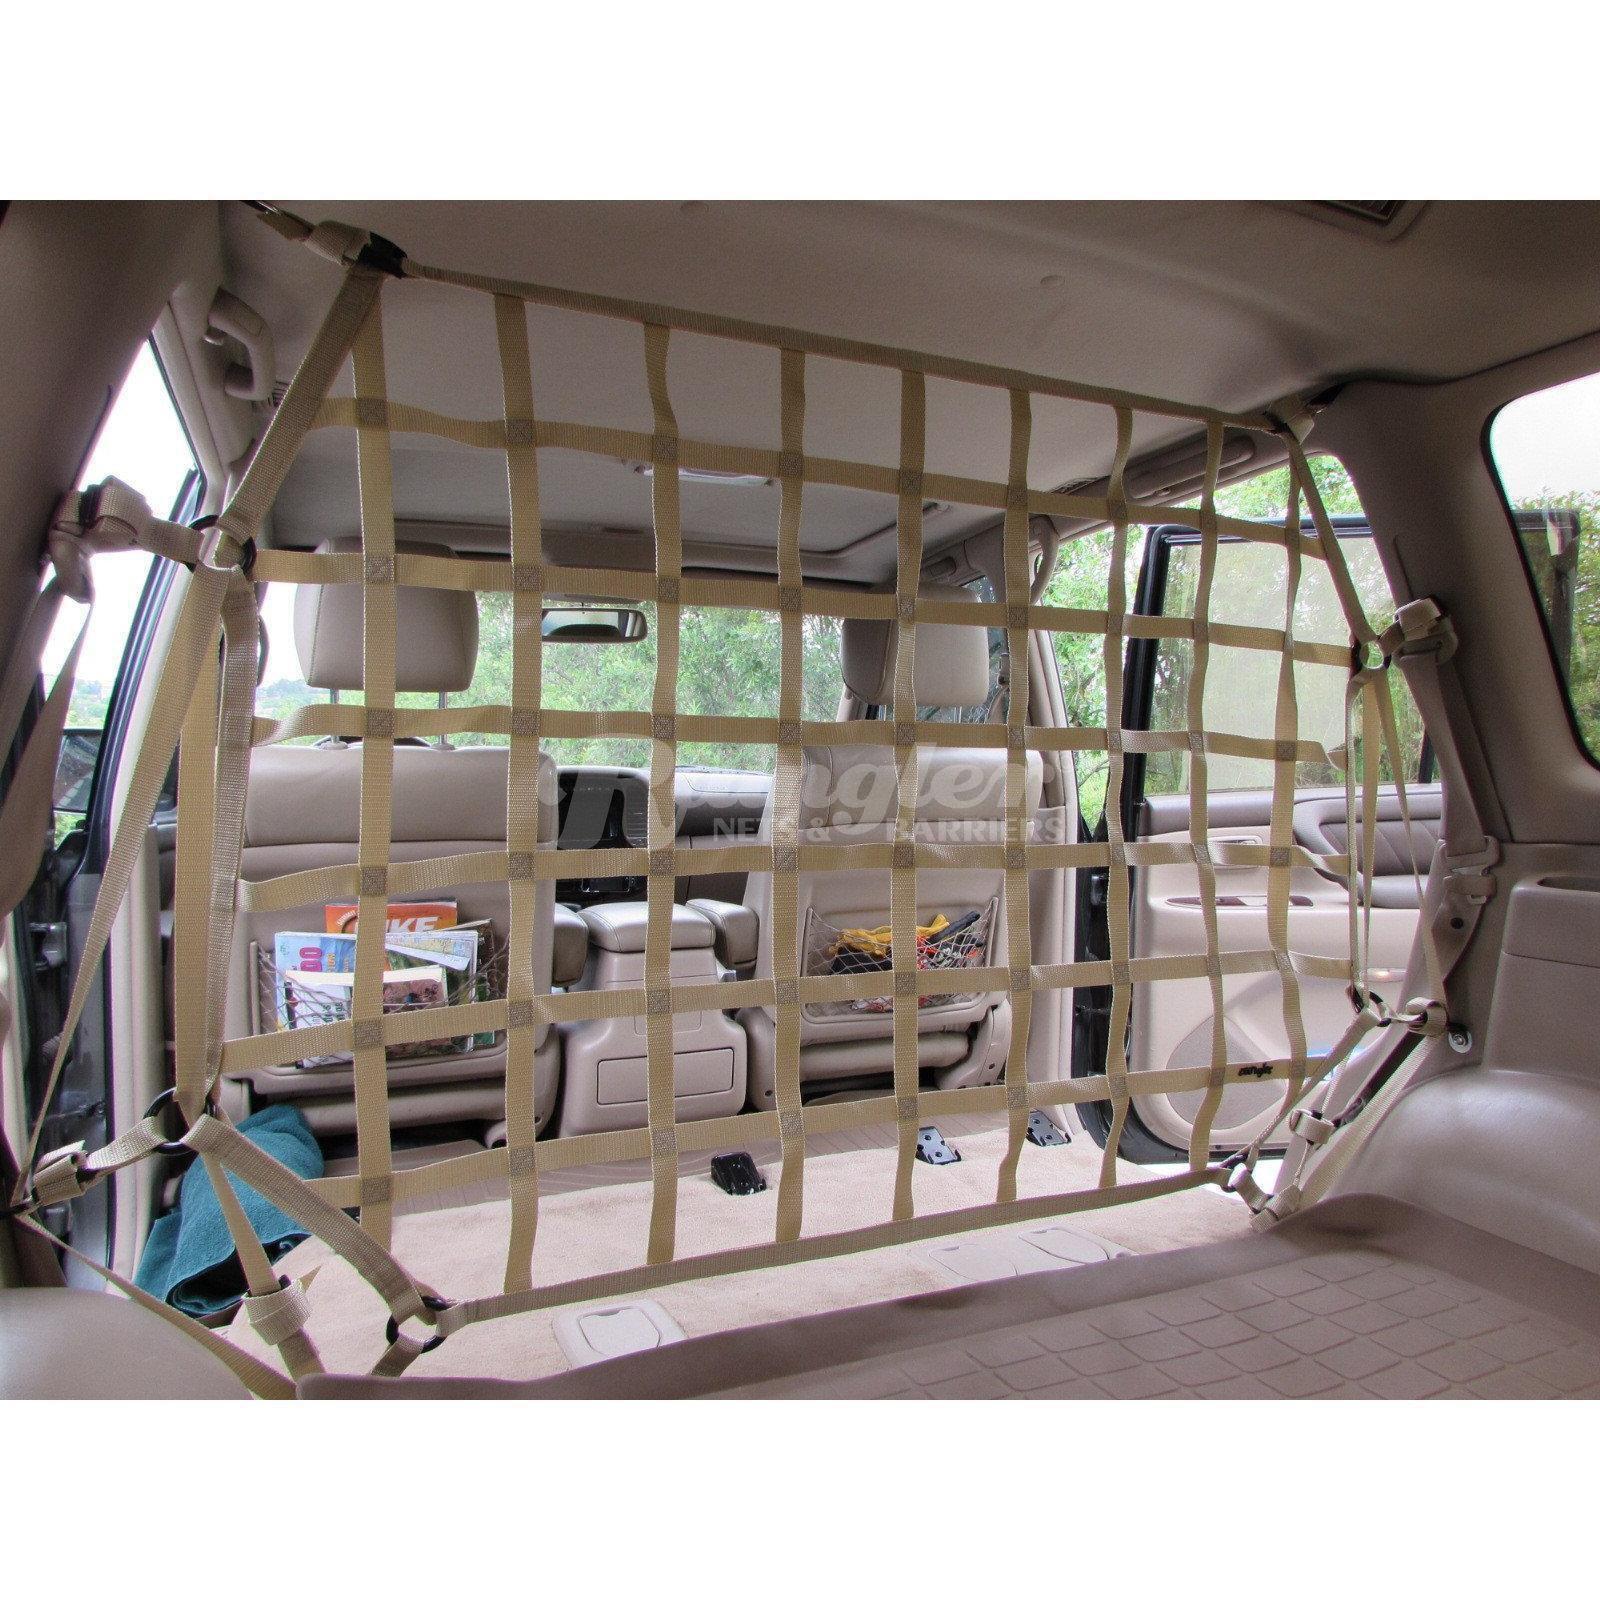 1998 - 2007 Toyota Land Cruiser (J100) Behind Front or 2nd Row Seats Barrier Divider Net - Dual Position